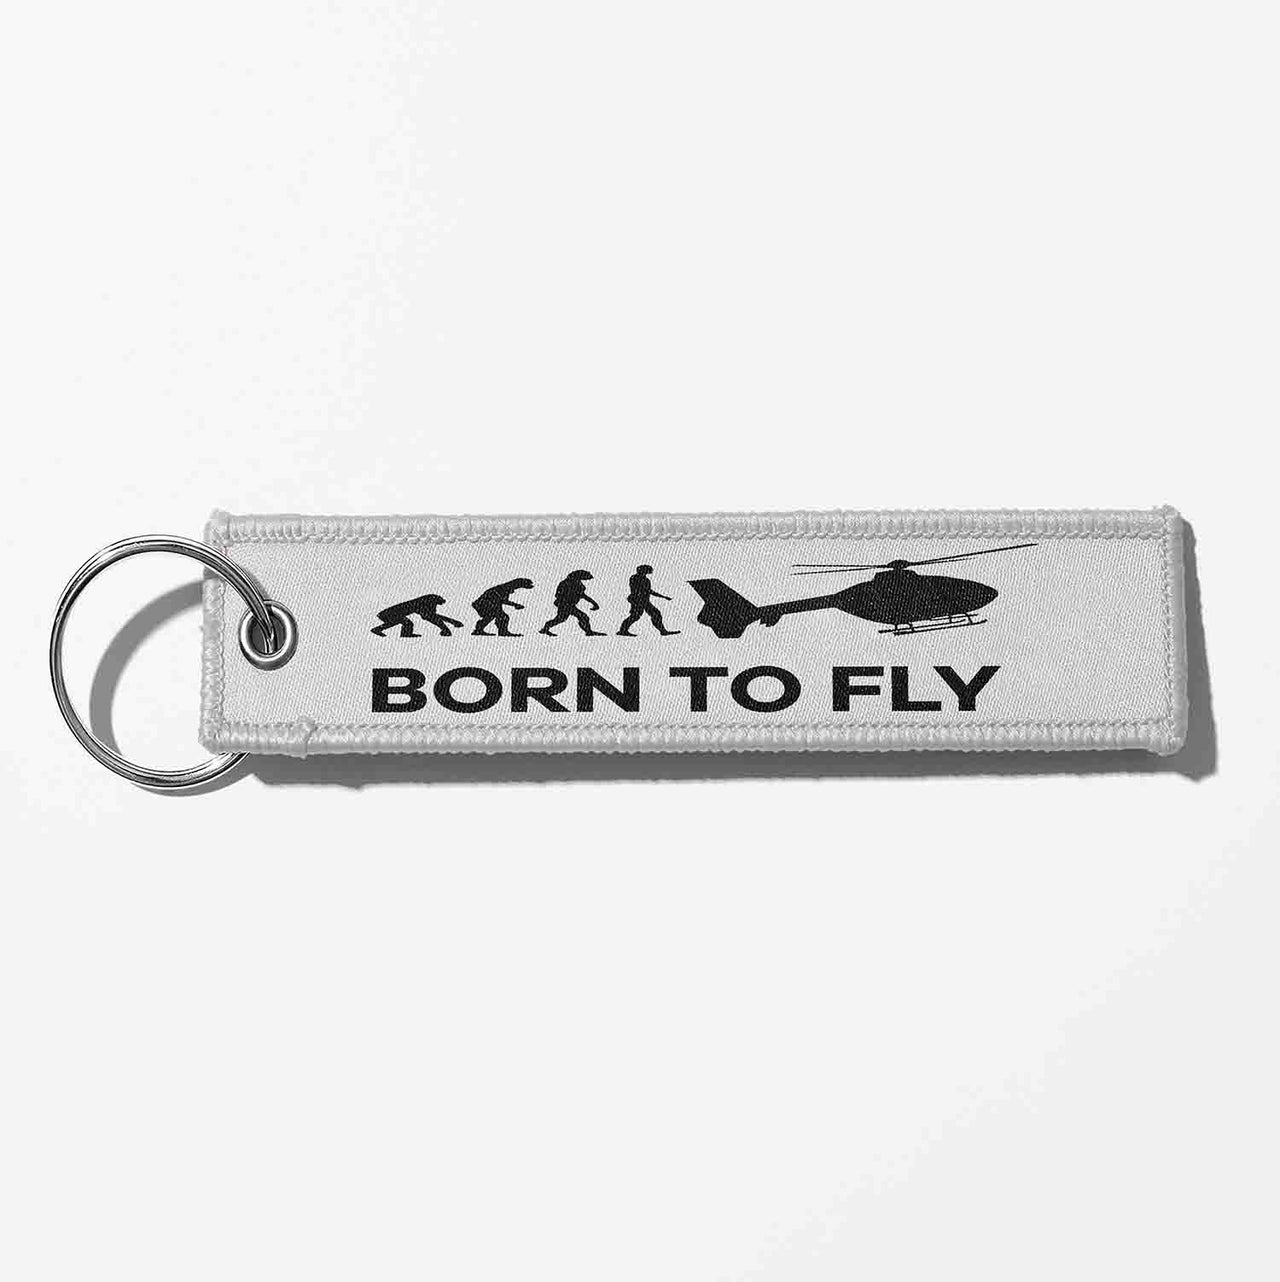 Born To Fly (Helicopter) Designed Key Chains